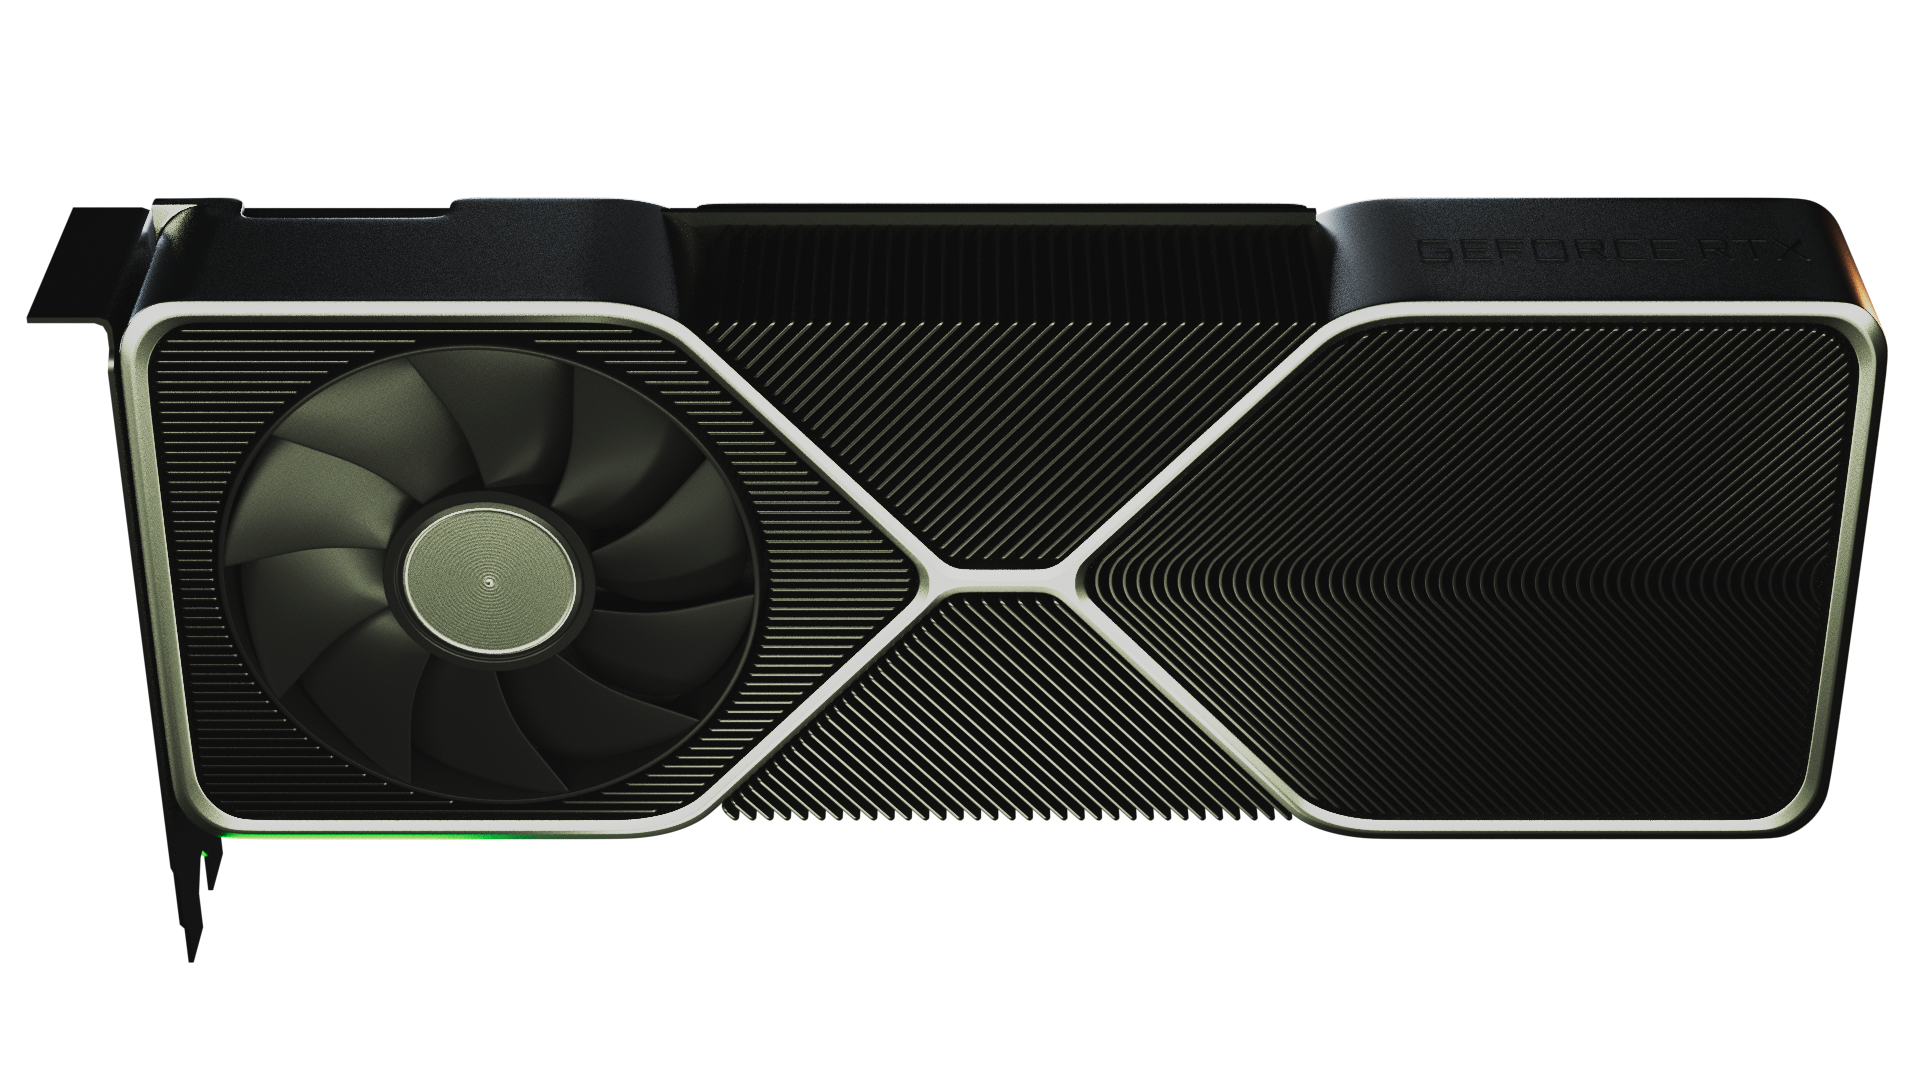 NVIDIA GeForce RTX 3080 3D Feature